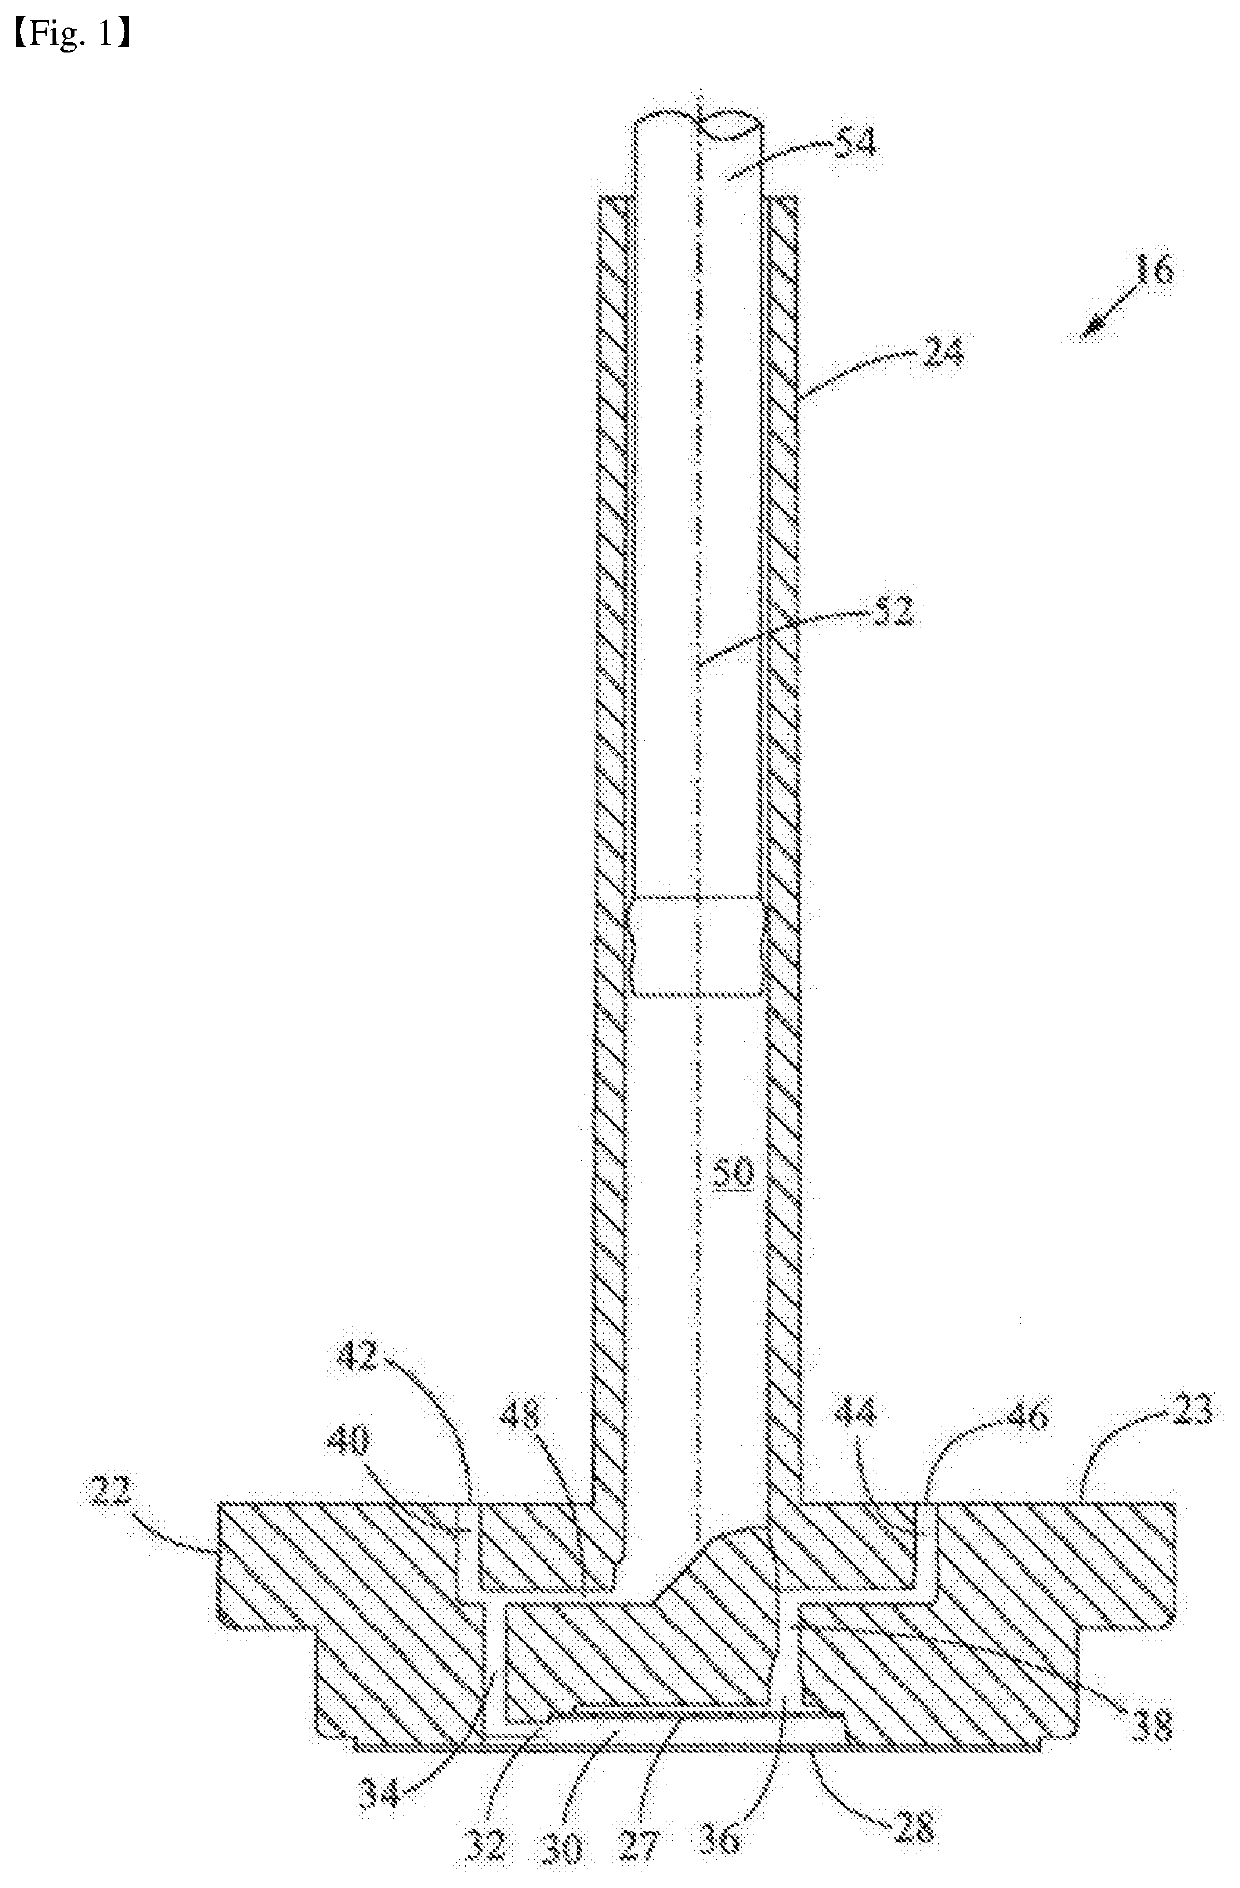 Cartridge for extracting nucleic acid